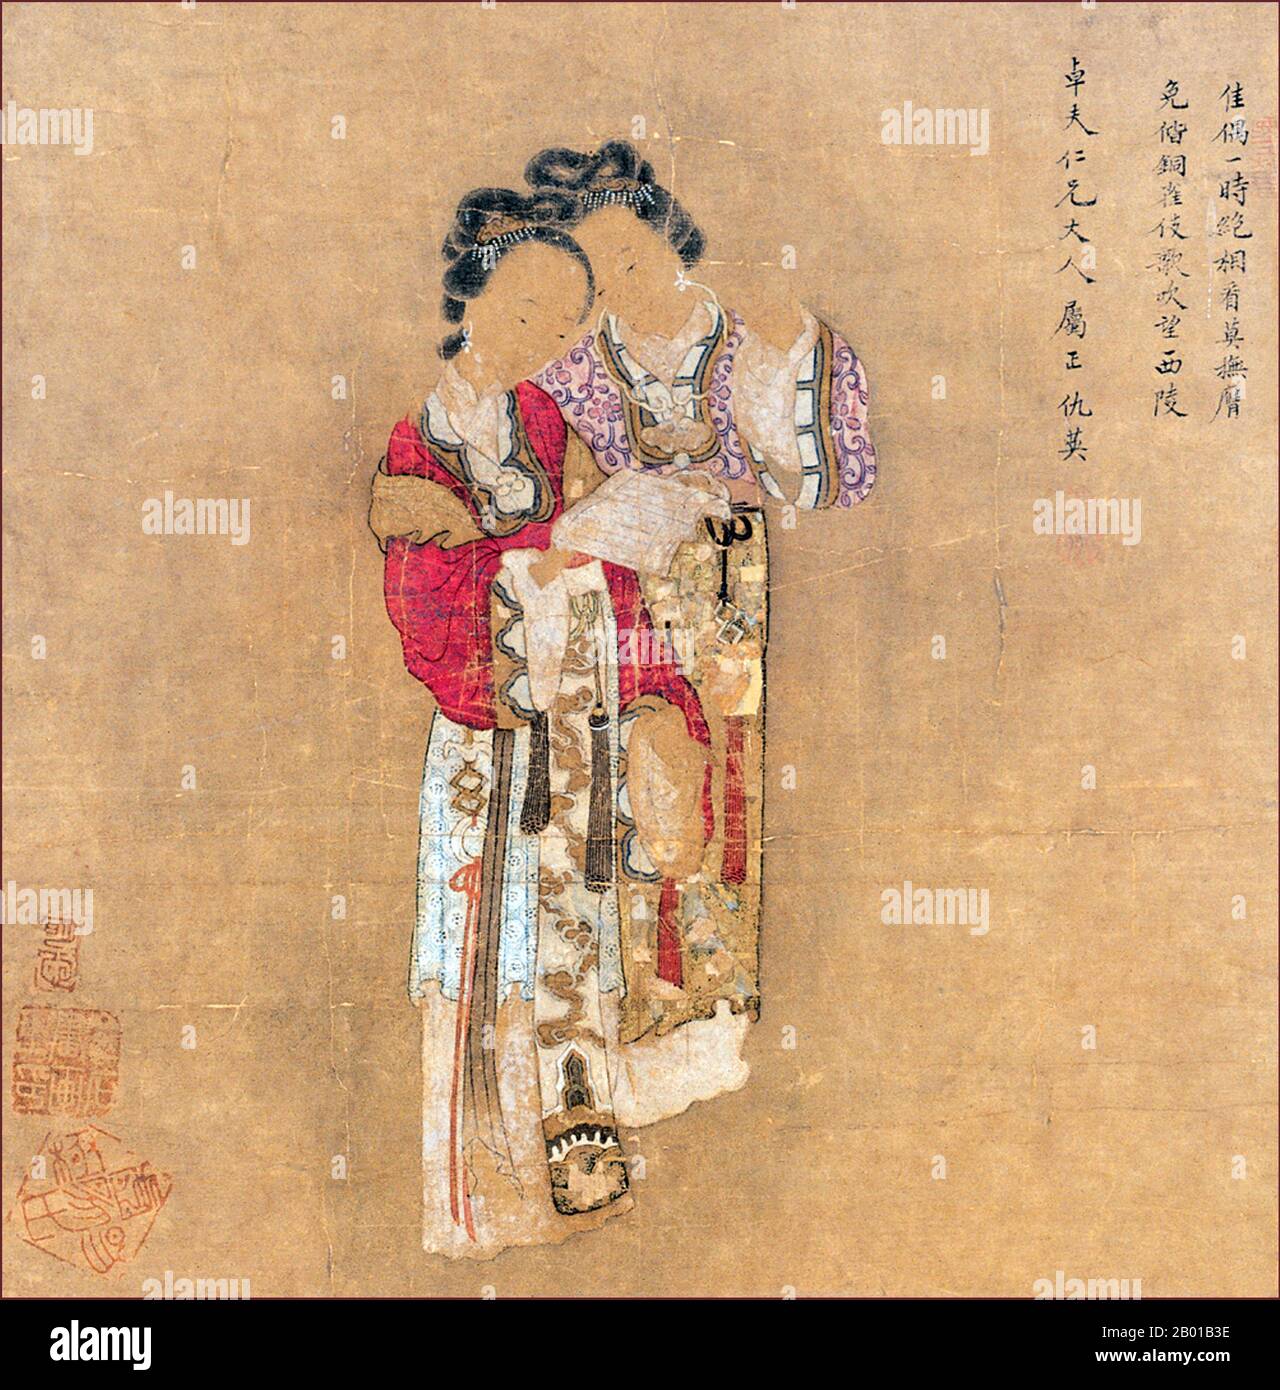 China: Xue Baochai ('Jewelled Hair Pin') and You Erjie ('Second Sister You') looking at a book. Detail of handscroll painting of a scene from the Dream of the Red Chamber, mid-18th century.  Dream of the Red Chamber (pinyin: Hóng Lóu Mèng; Wade–Giles: Hung Lou Meng), composed by Cao Xueqin (4 April 1710 - 10 June 1765), is one of China's Four Great Classical Novels. It was composed sometime in the middle of the 18th century during the Qing Dynasty. It is a masterpiece of Chinese vernacular literature and is generally acknowledged to be the pinnacle of classical Chinese novels. Stock Photo